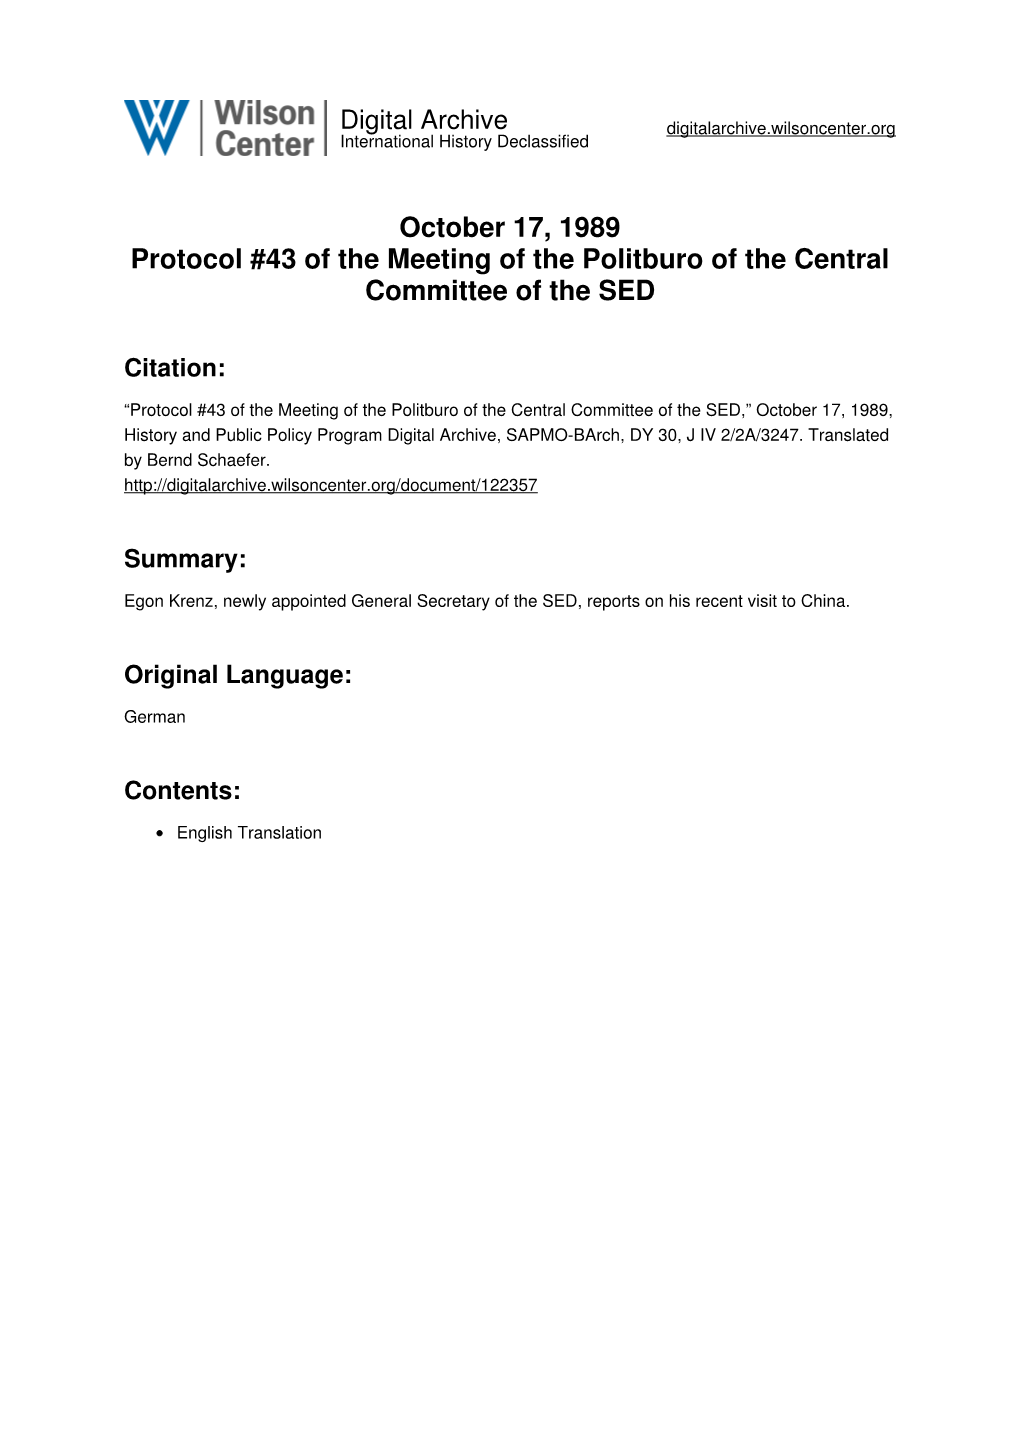 October 17, 1989 Protocol #43 of the Meeting of the Politburo of the Central Committee of the SED